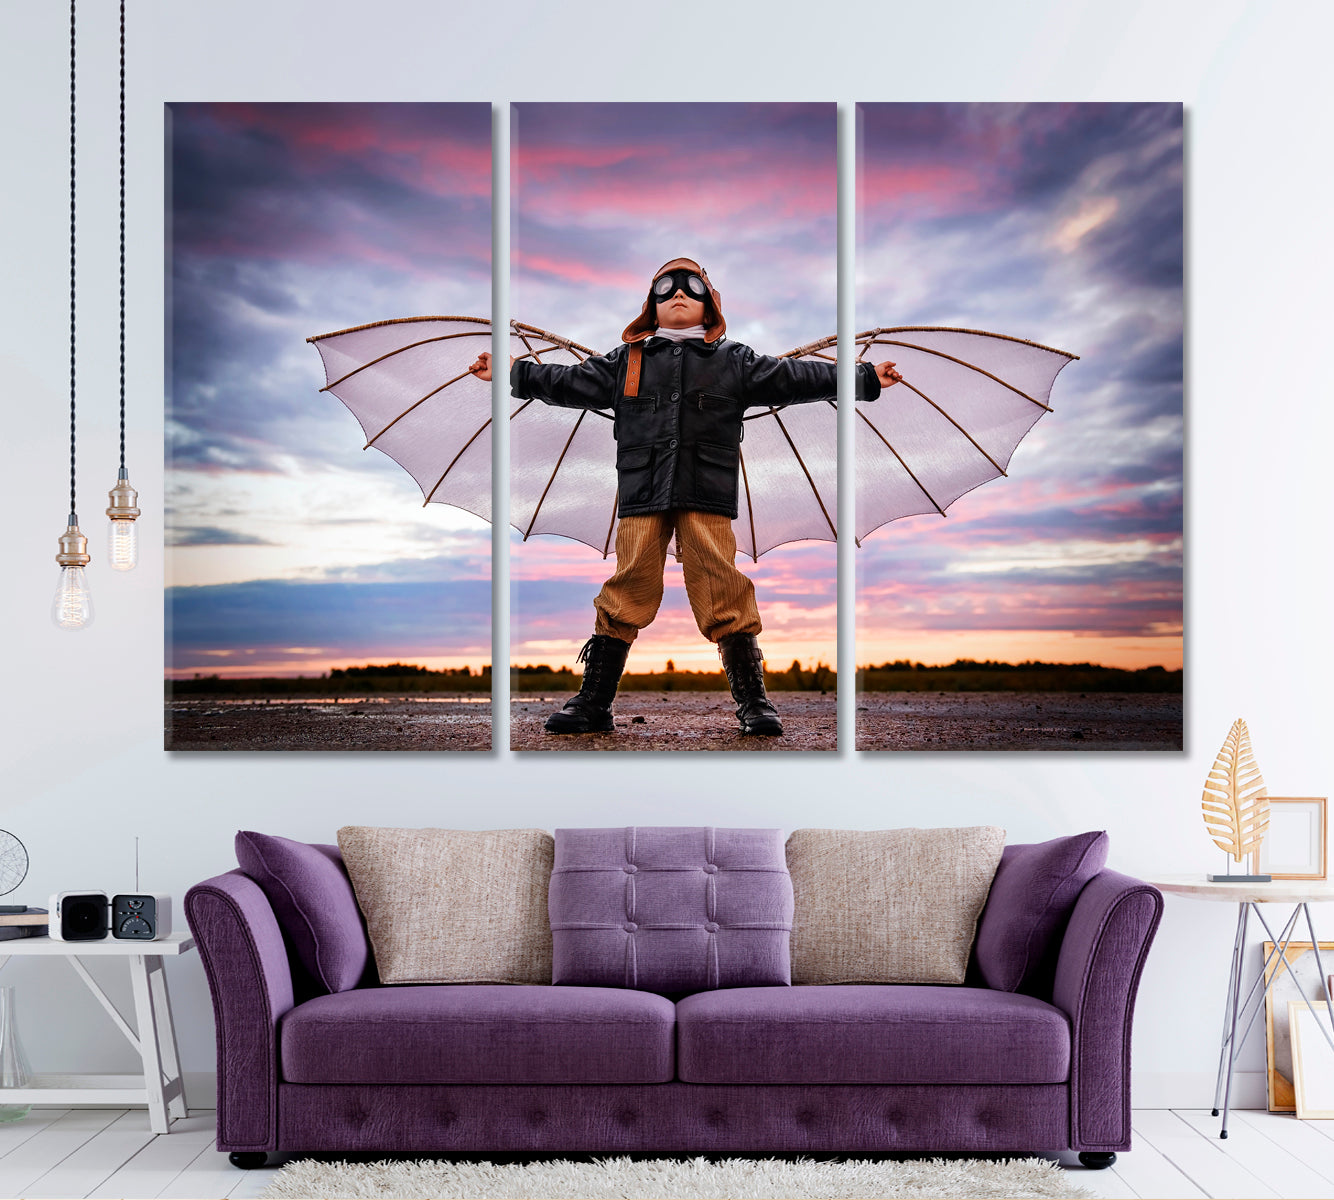 Pilot and Dreams of Flying Poster Photo Art Artesty 3 panels 36" x 24" 